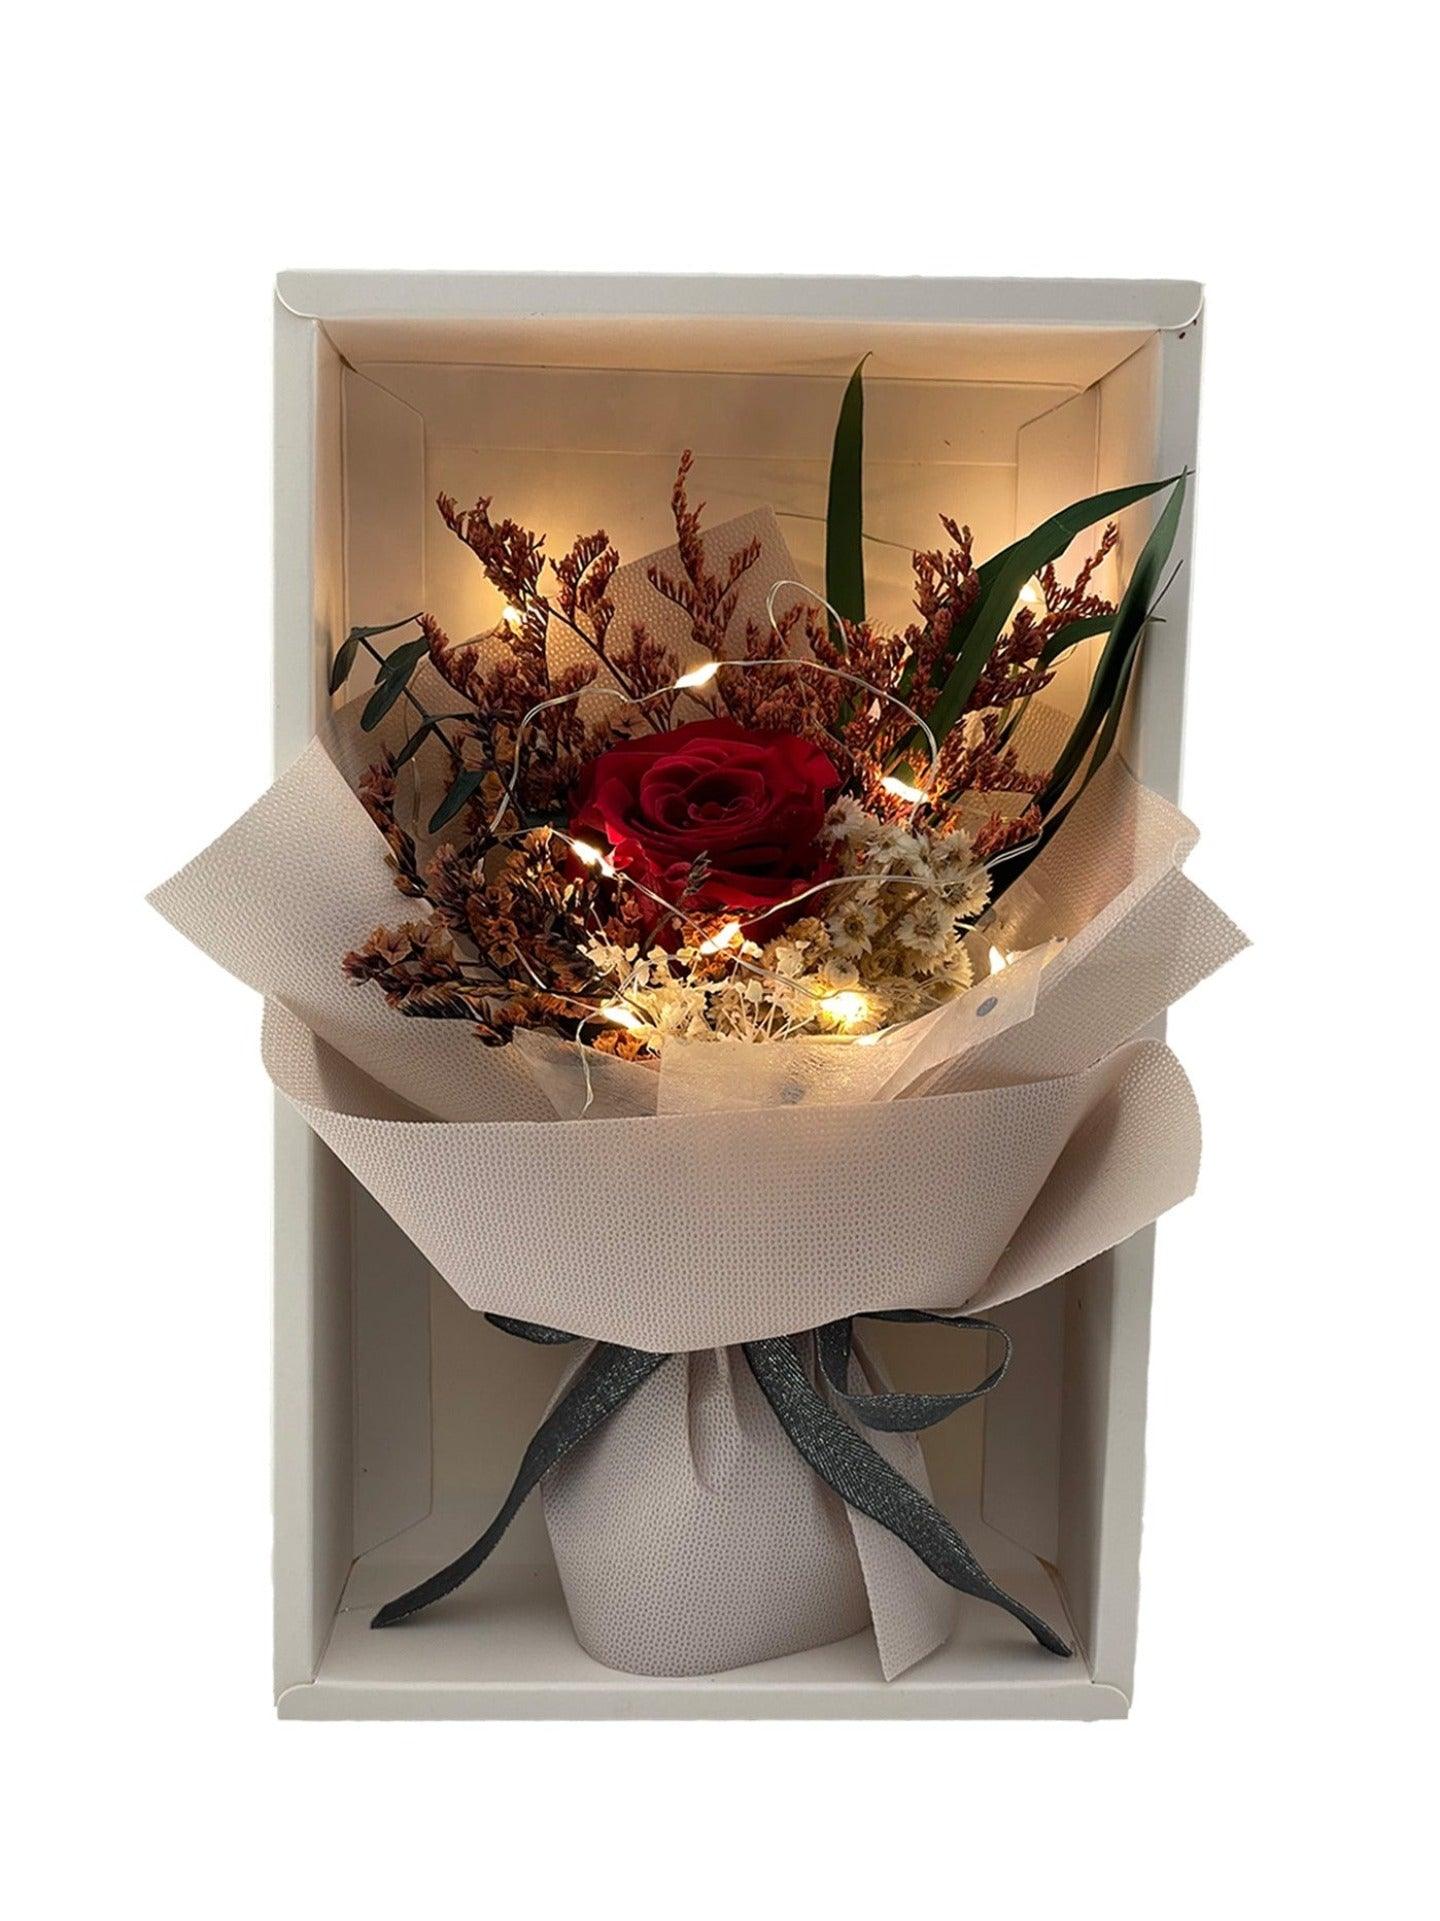 White box containing a red preserved rose, assorted dried flowers and a fairy light, encased in warm beige wrap and adorned with a grey ribbon.